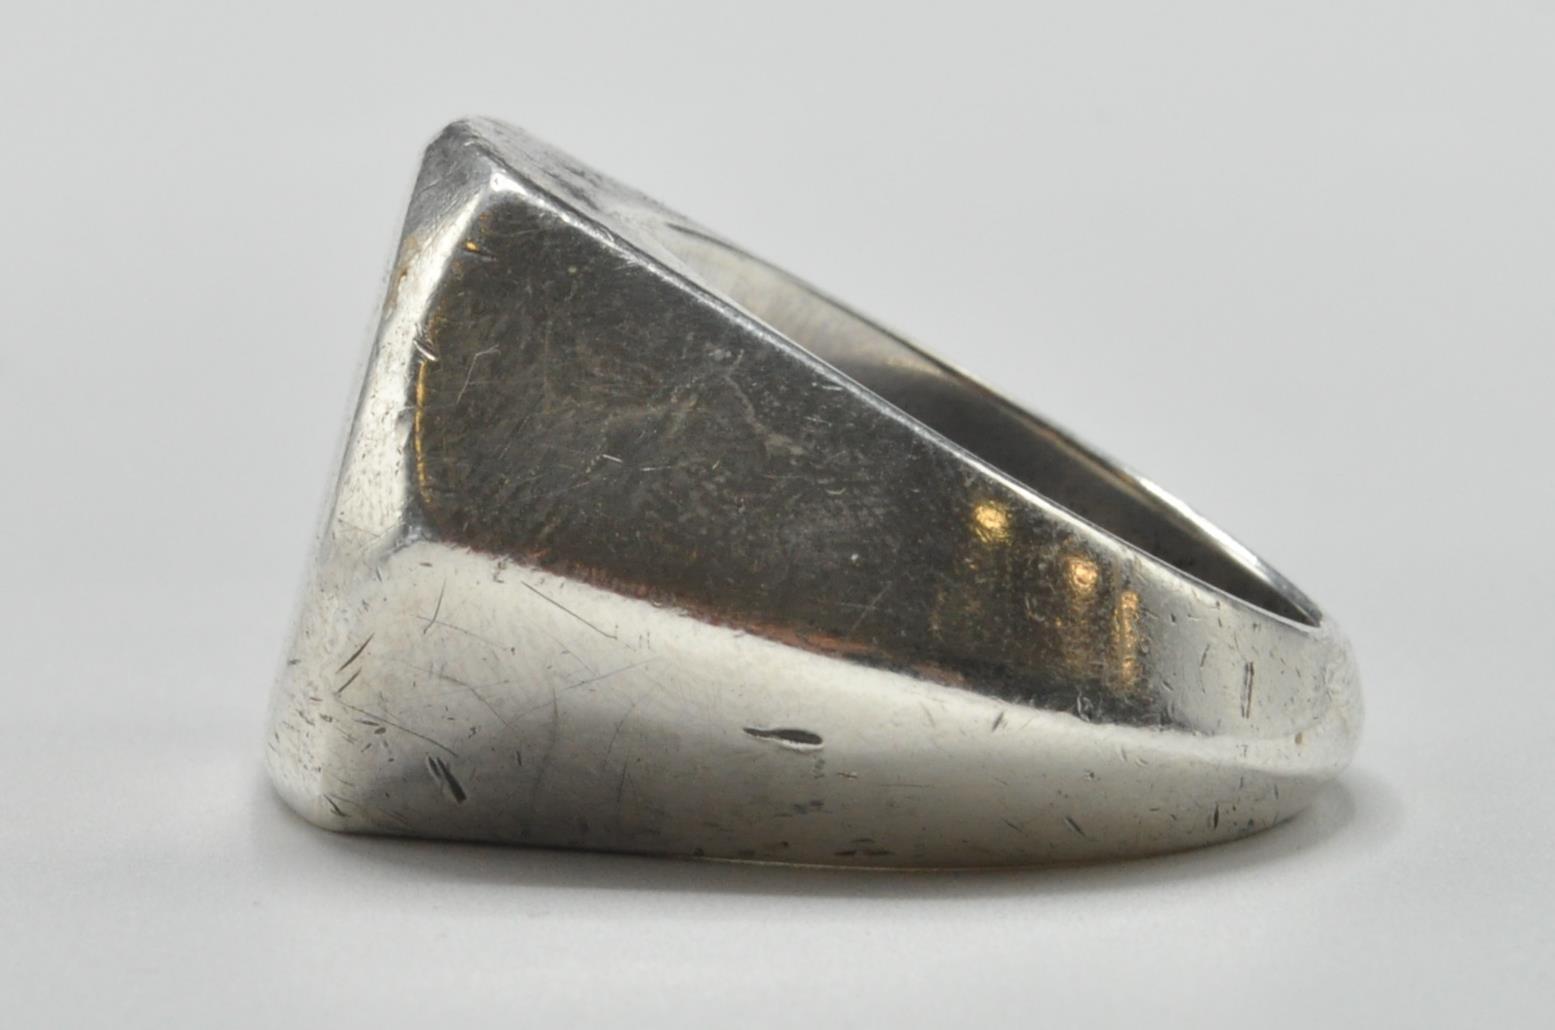 GENTLEMEN'S SILVER GUCCI MADE RING - Image 6 of 7